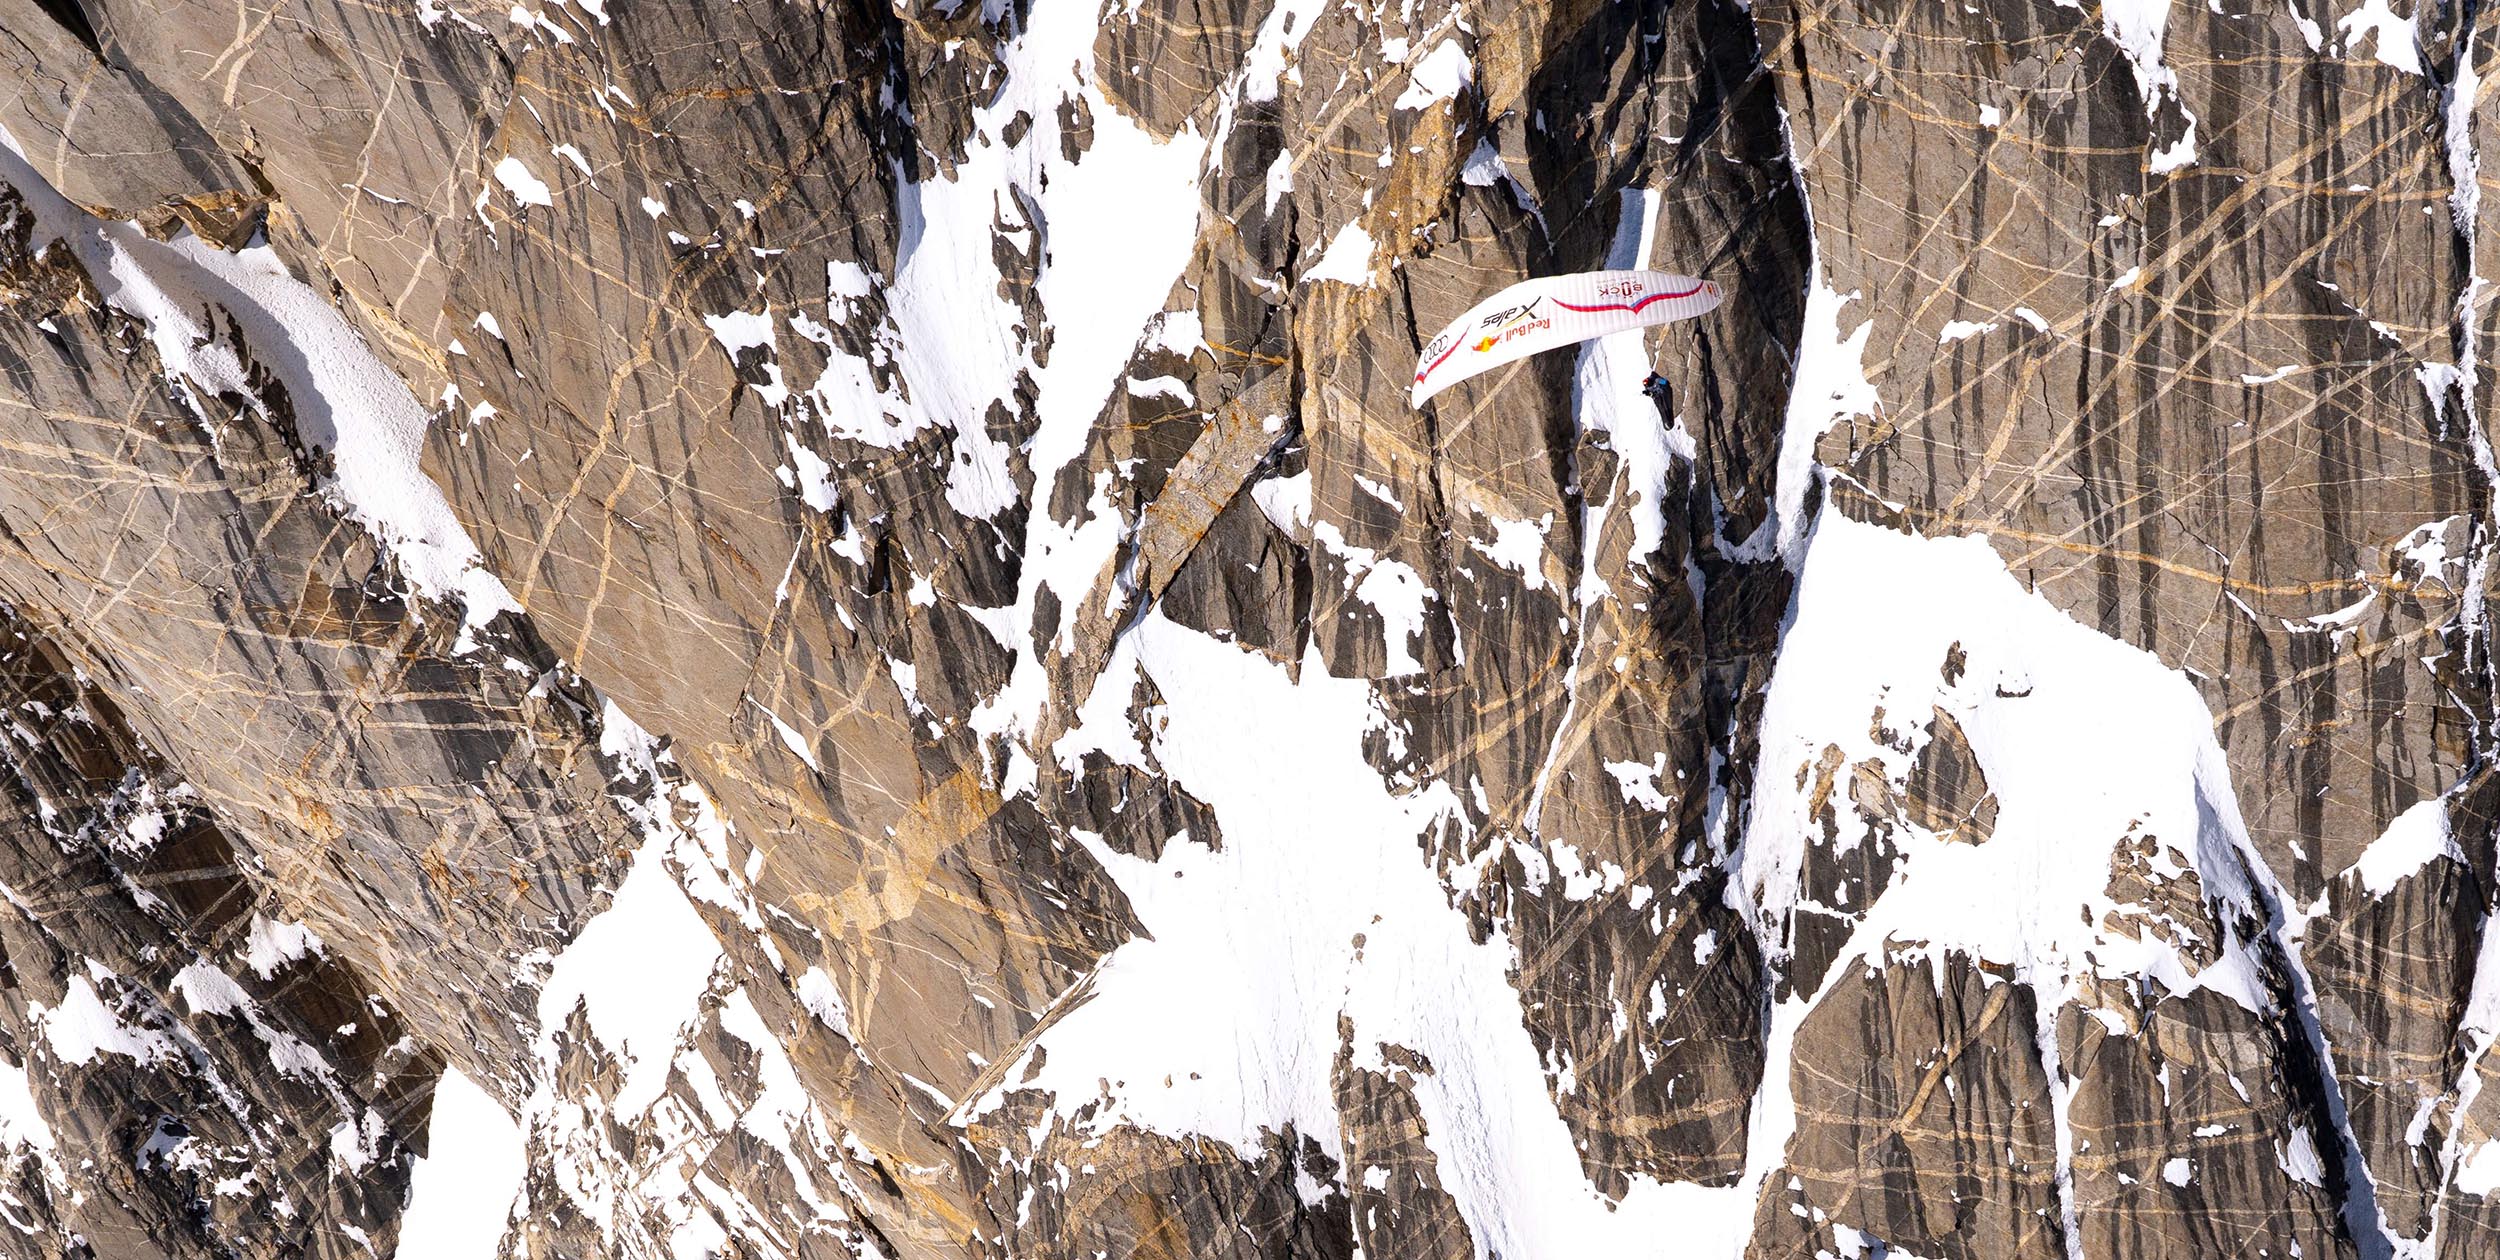 New Way Up climb and fly in Pakistan. Photo: Jake Holland